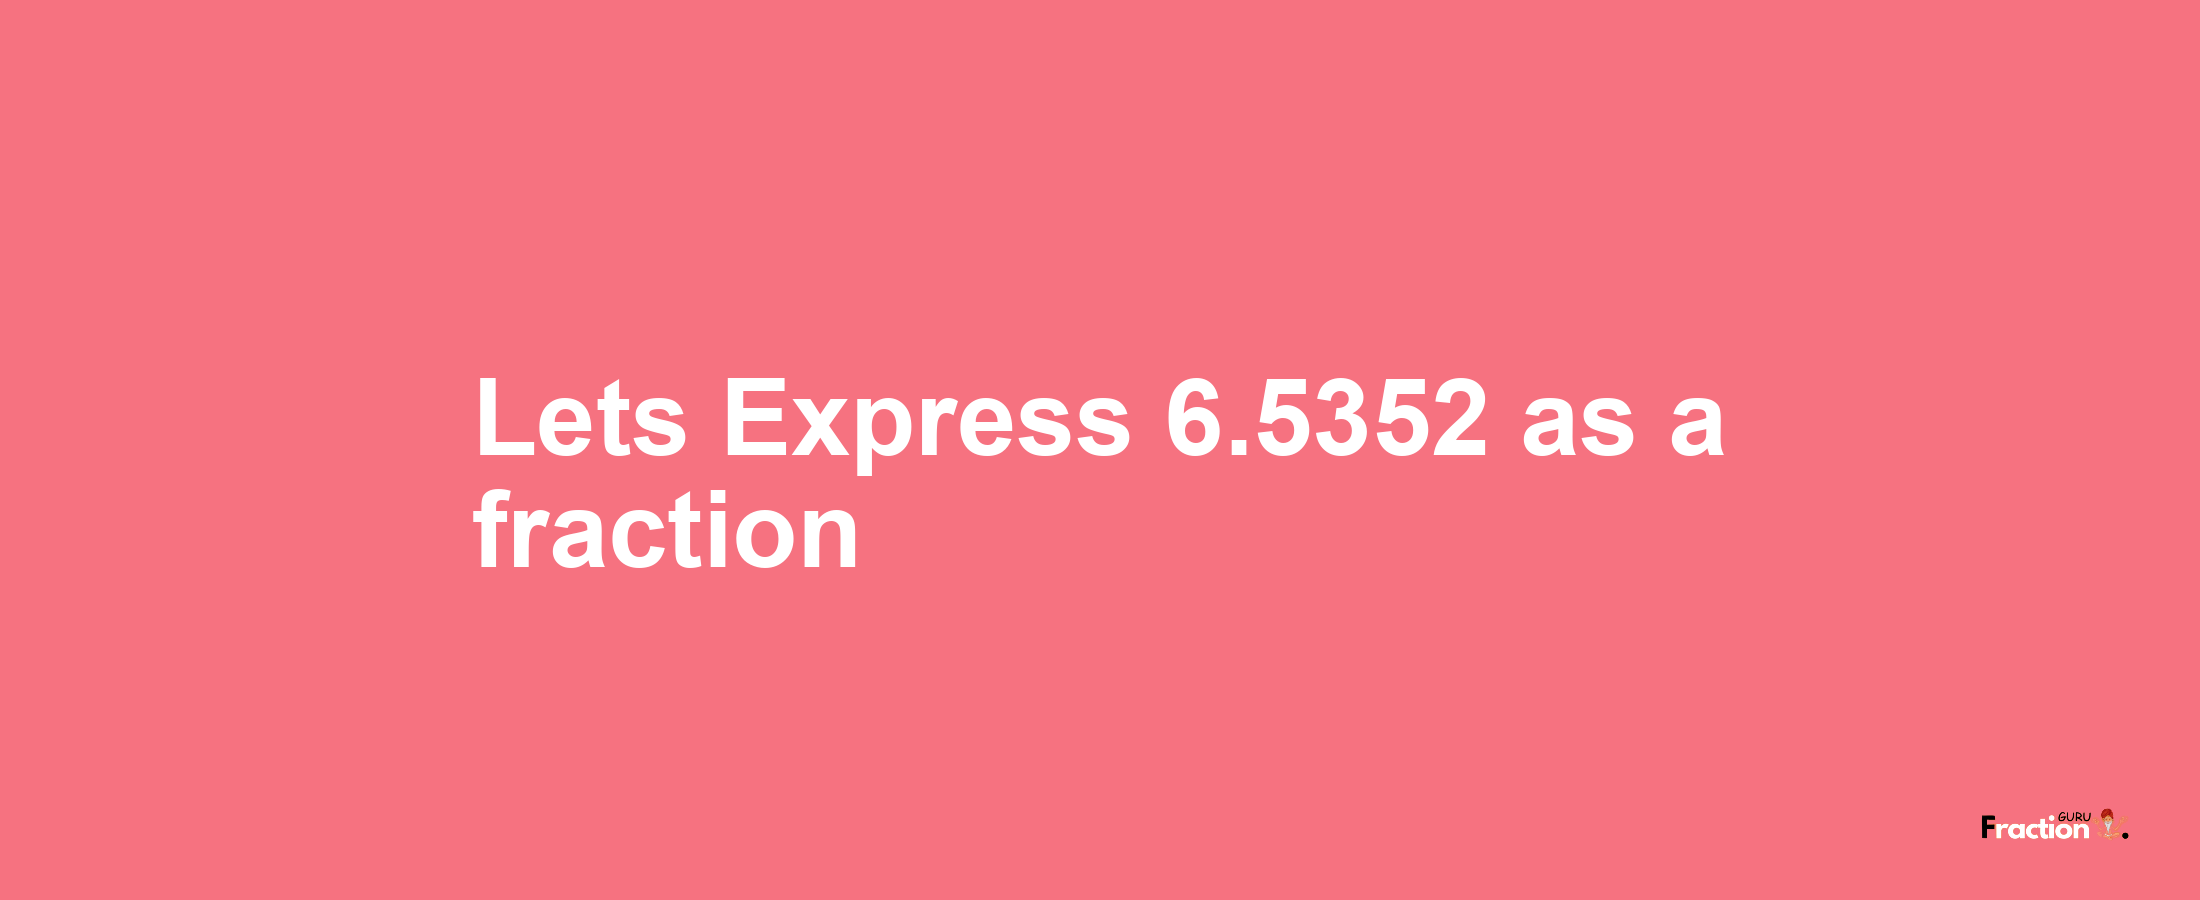 Lets Express 6.5352 as afraction